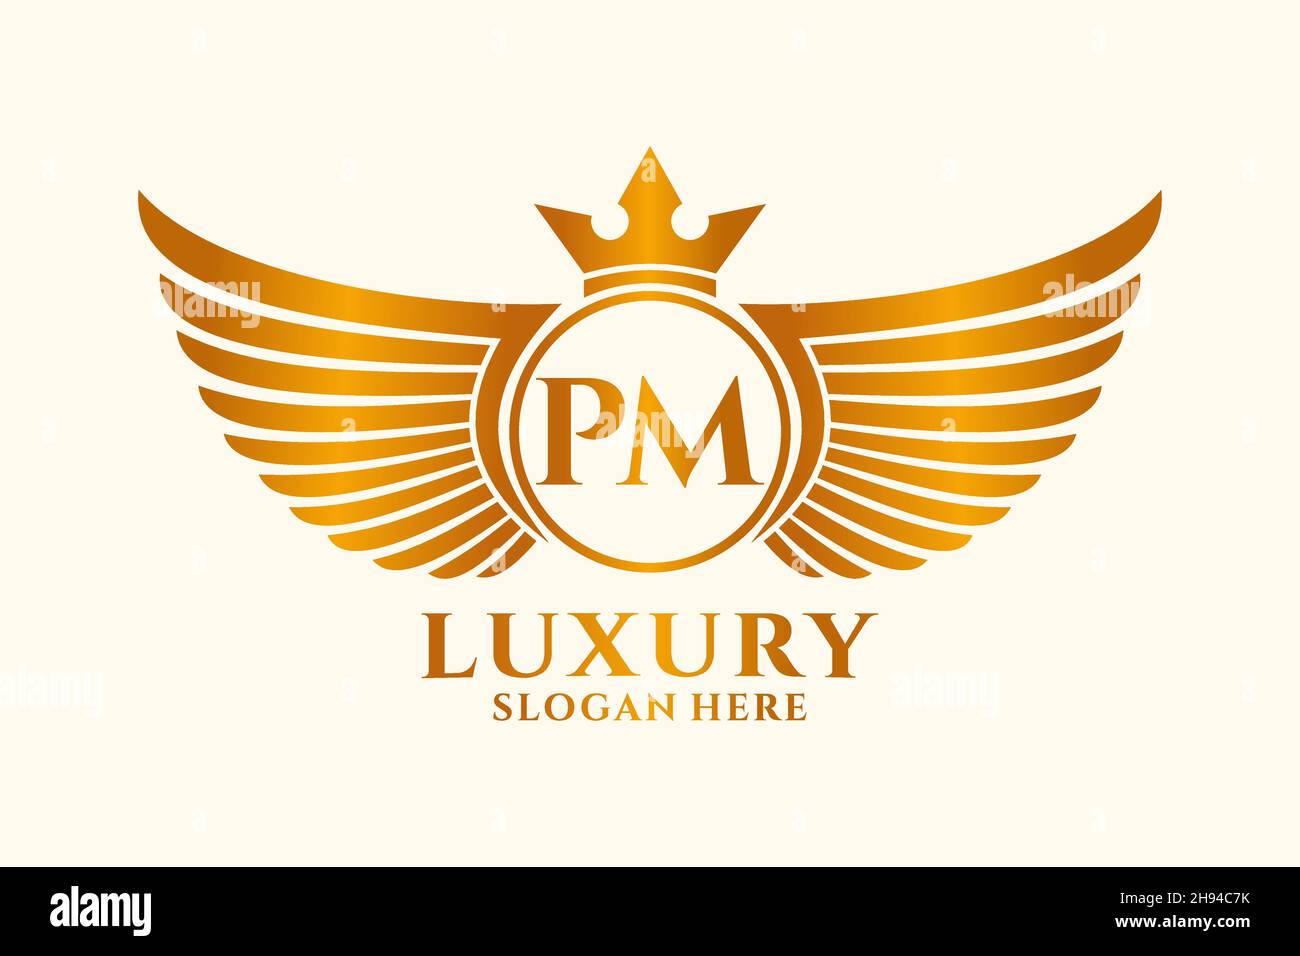 Letter PM Logo, luxury pm logo icon vector for modern Hotel